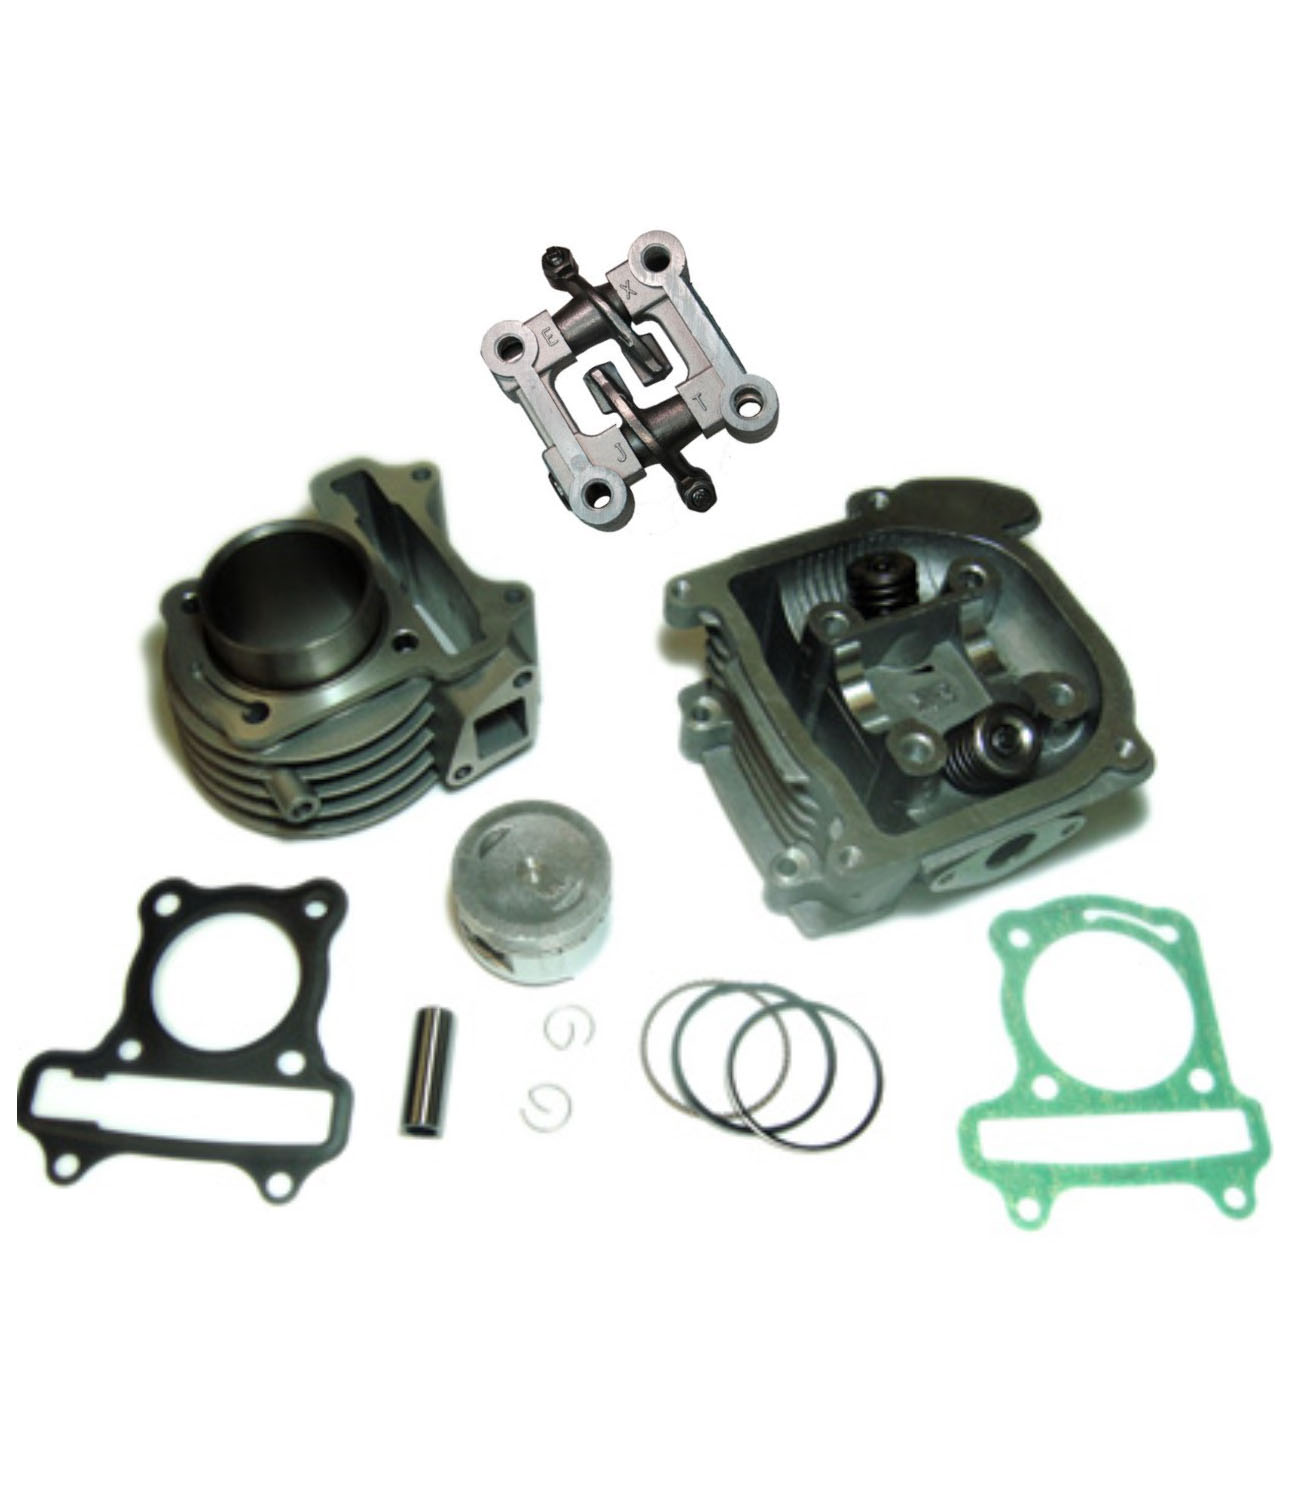 80cc Cylinder Piston Top End Kit With Non-EGR Head For GY6-50 QMB139 Chinese Scooter Motors. Bore=47mm - Click Image to Close